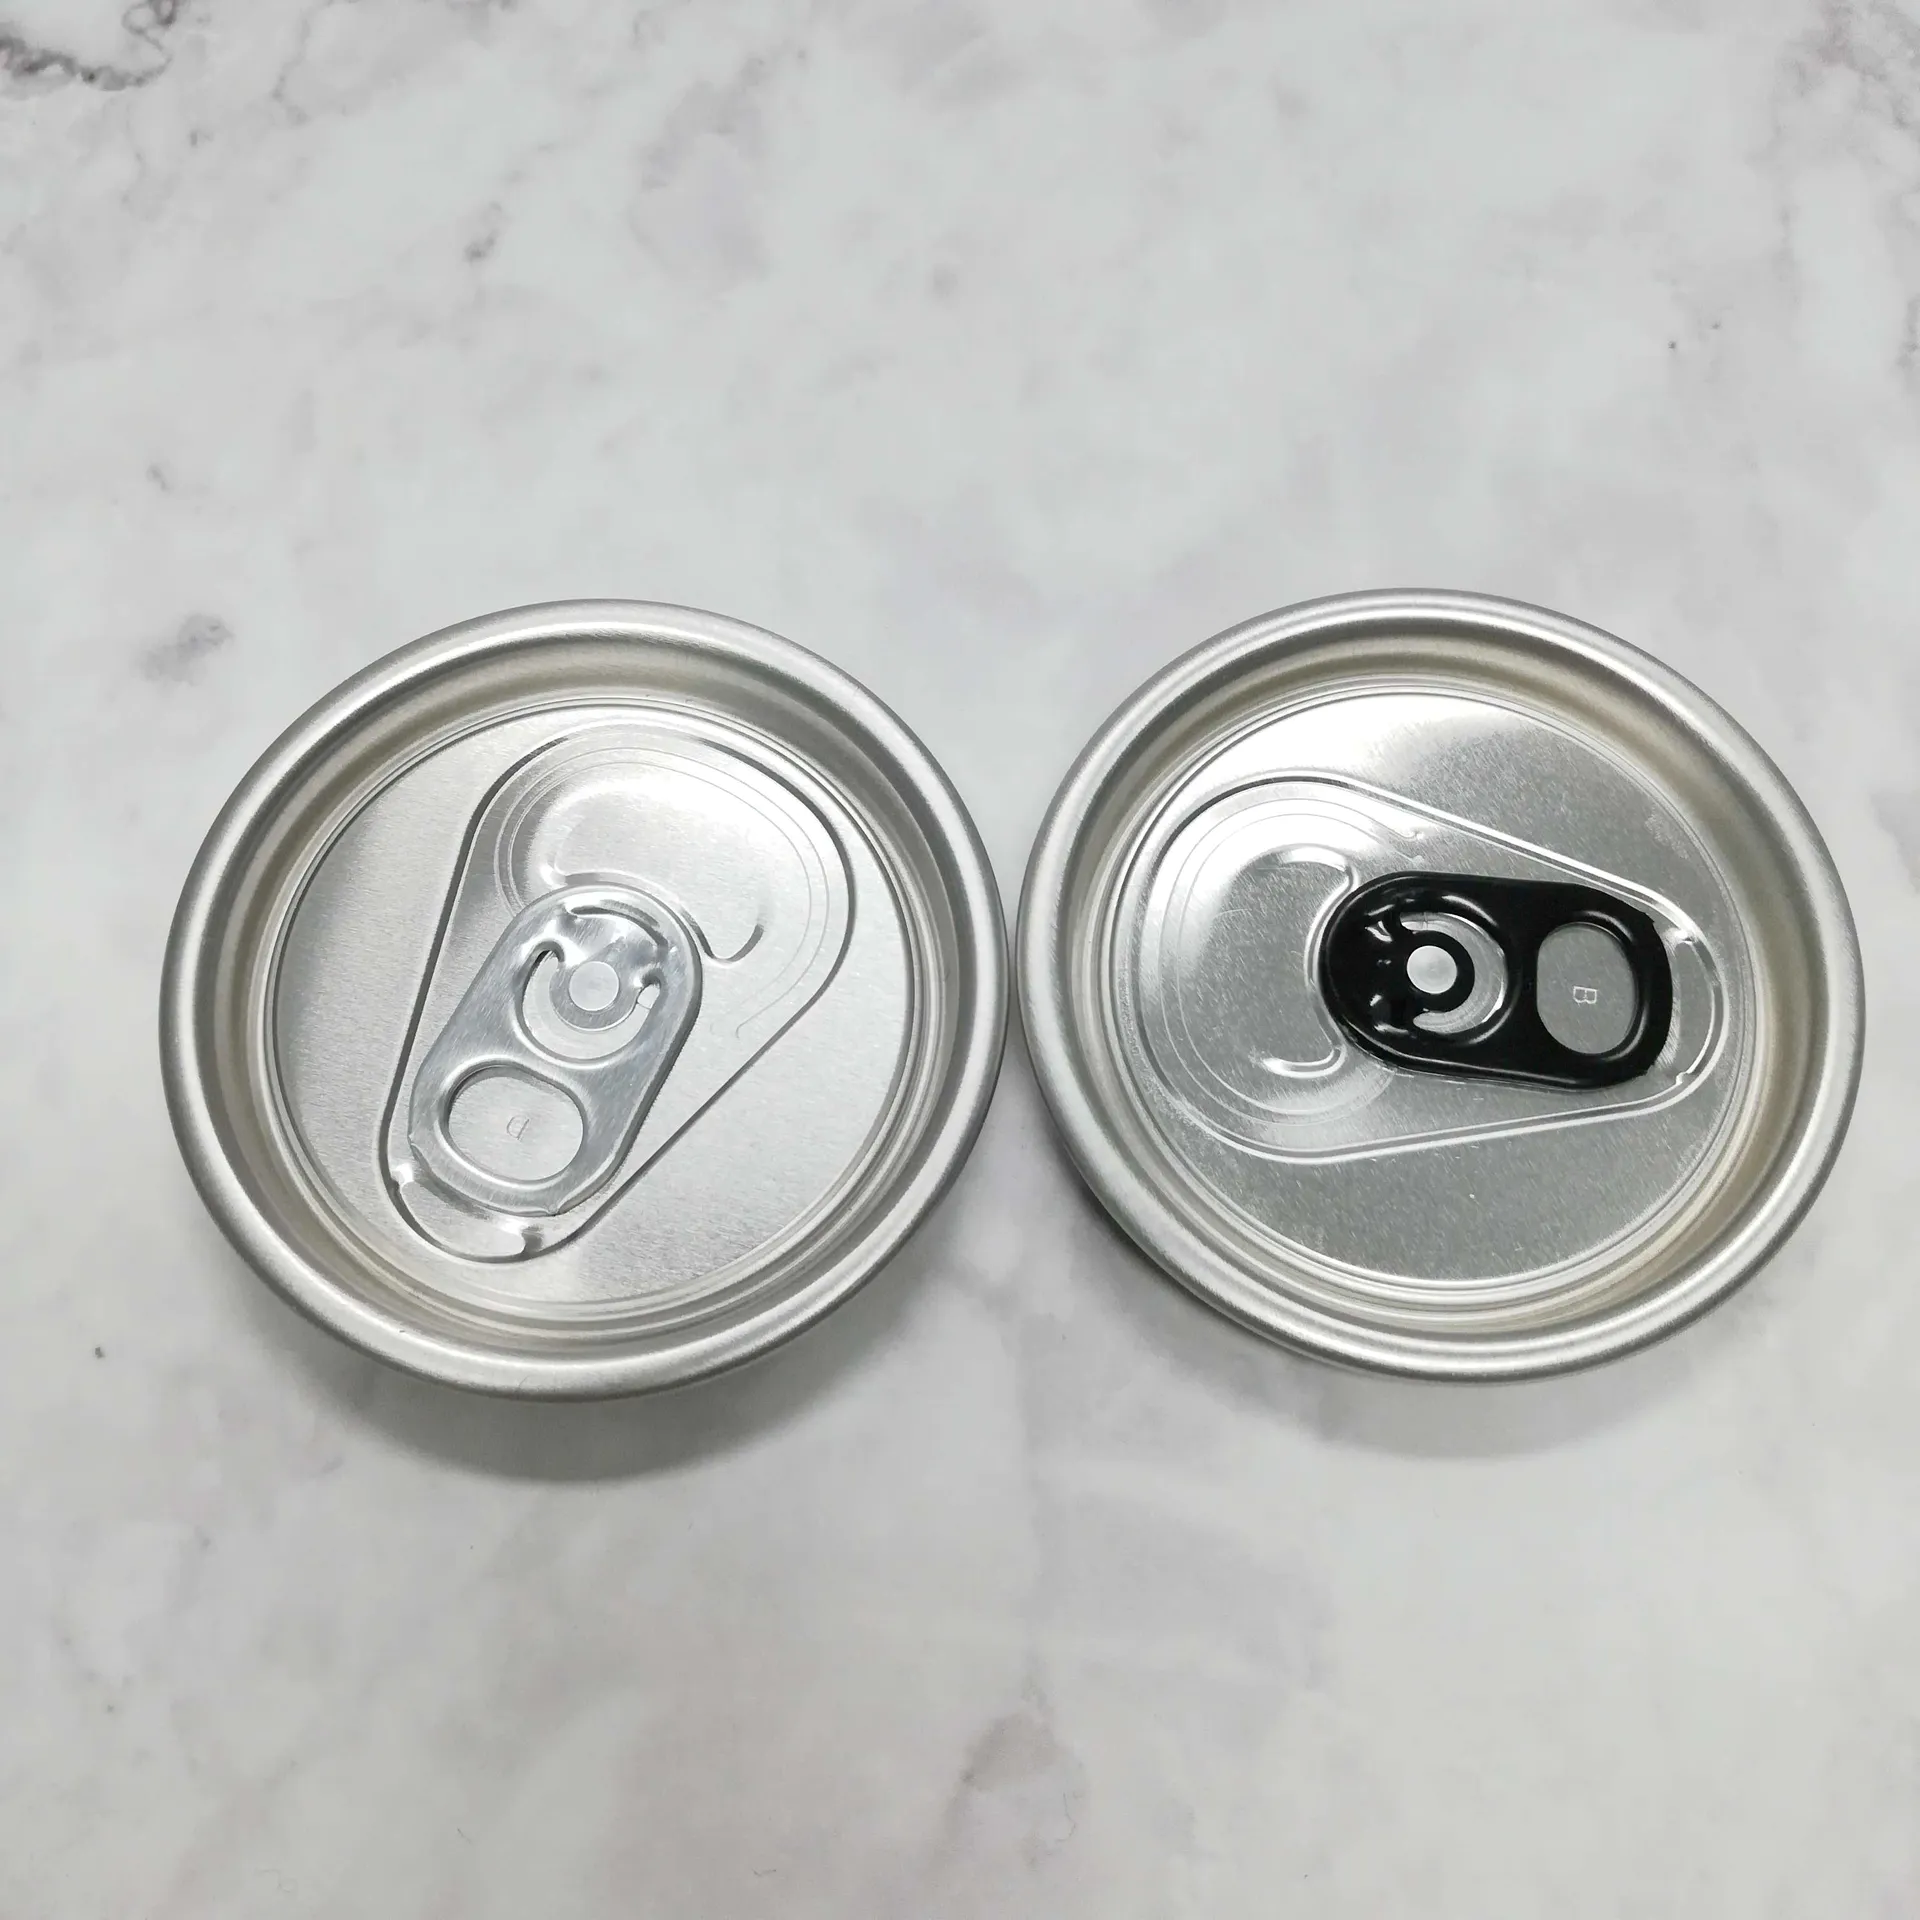 product-Wholesale food grade empty blank Aluminum Can sleek 330ml Without Print for Craft Beer Brewe-1